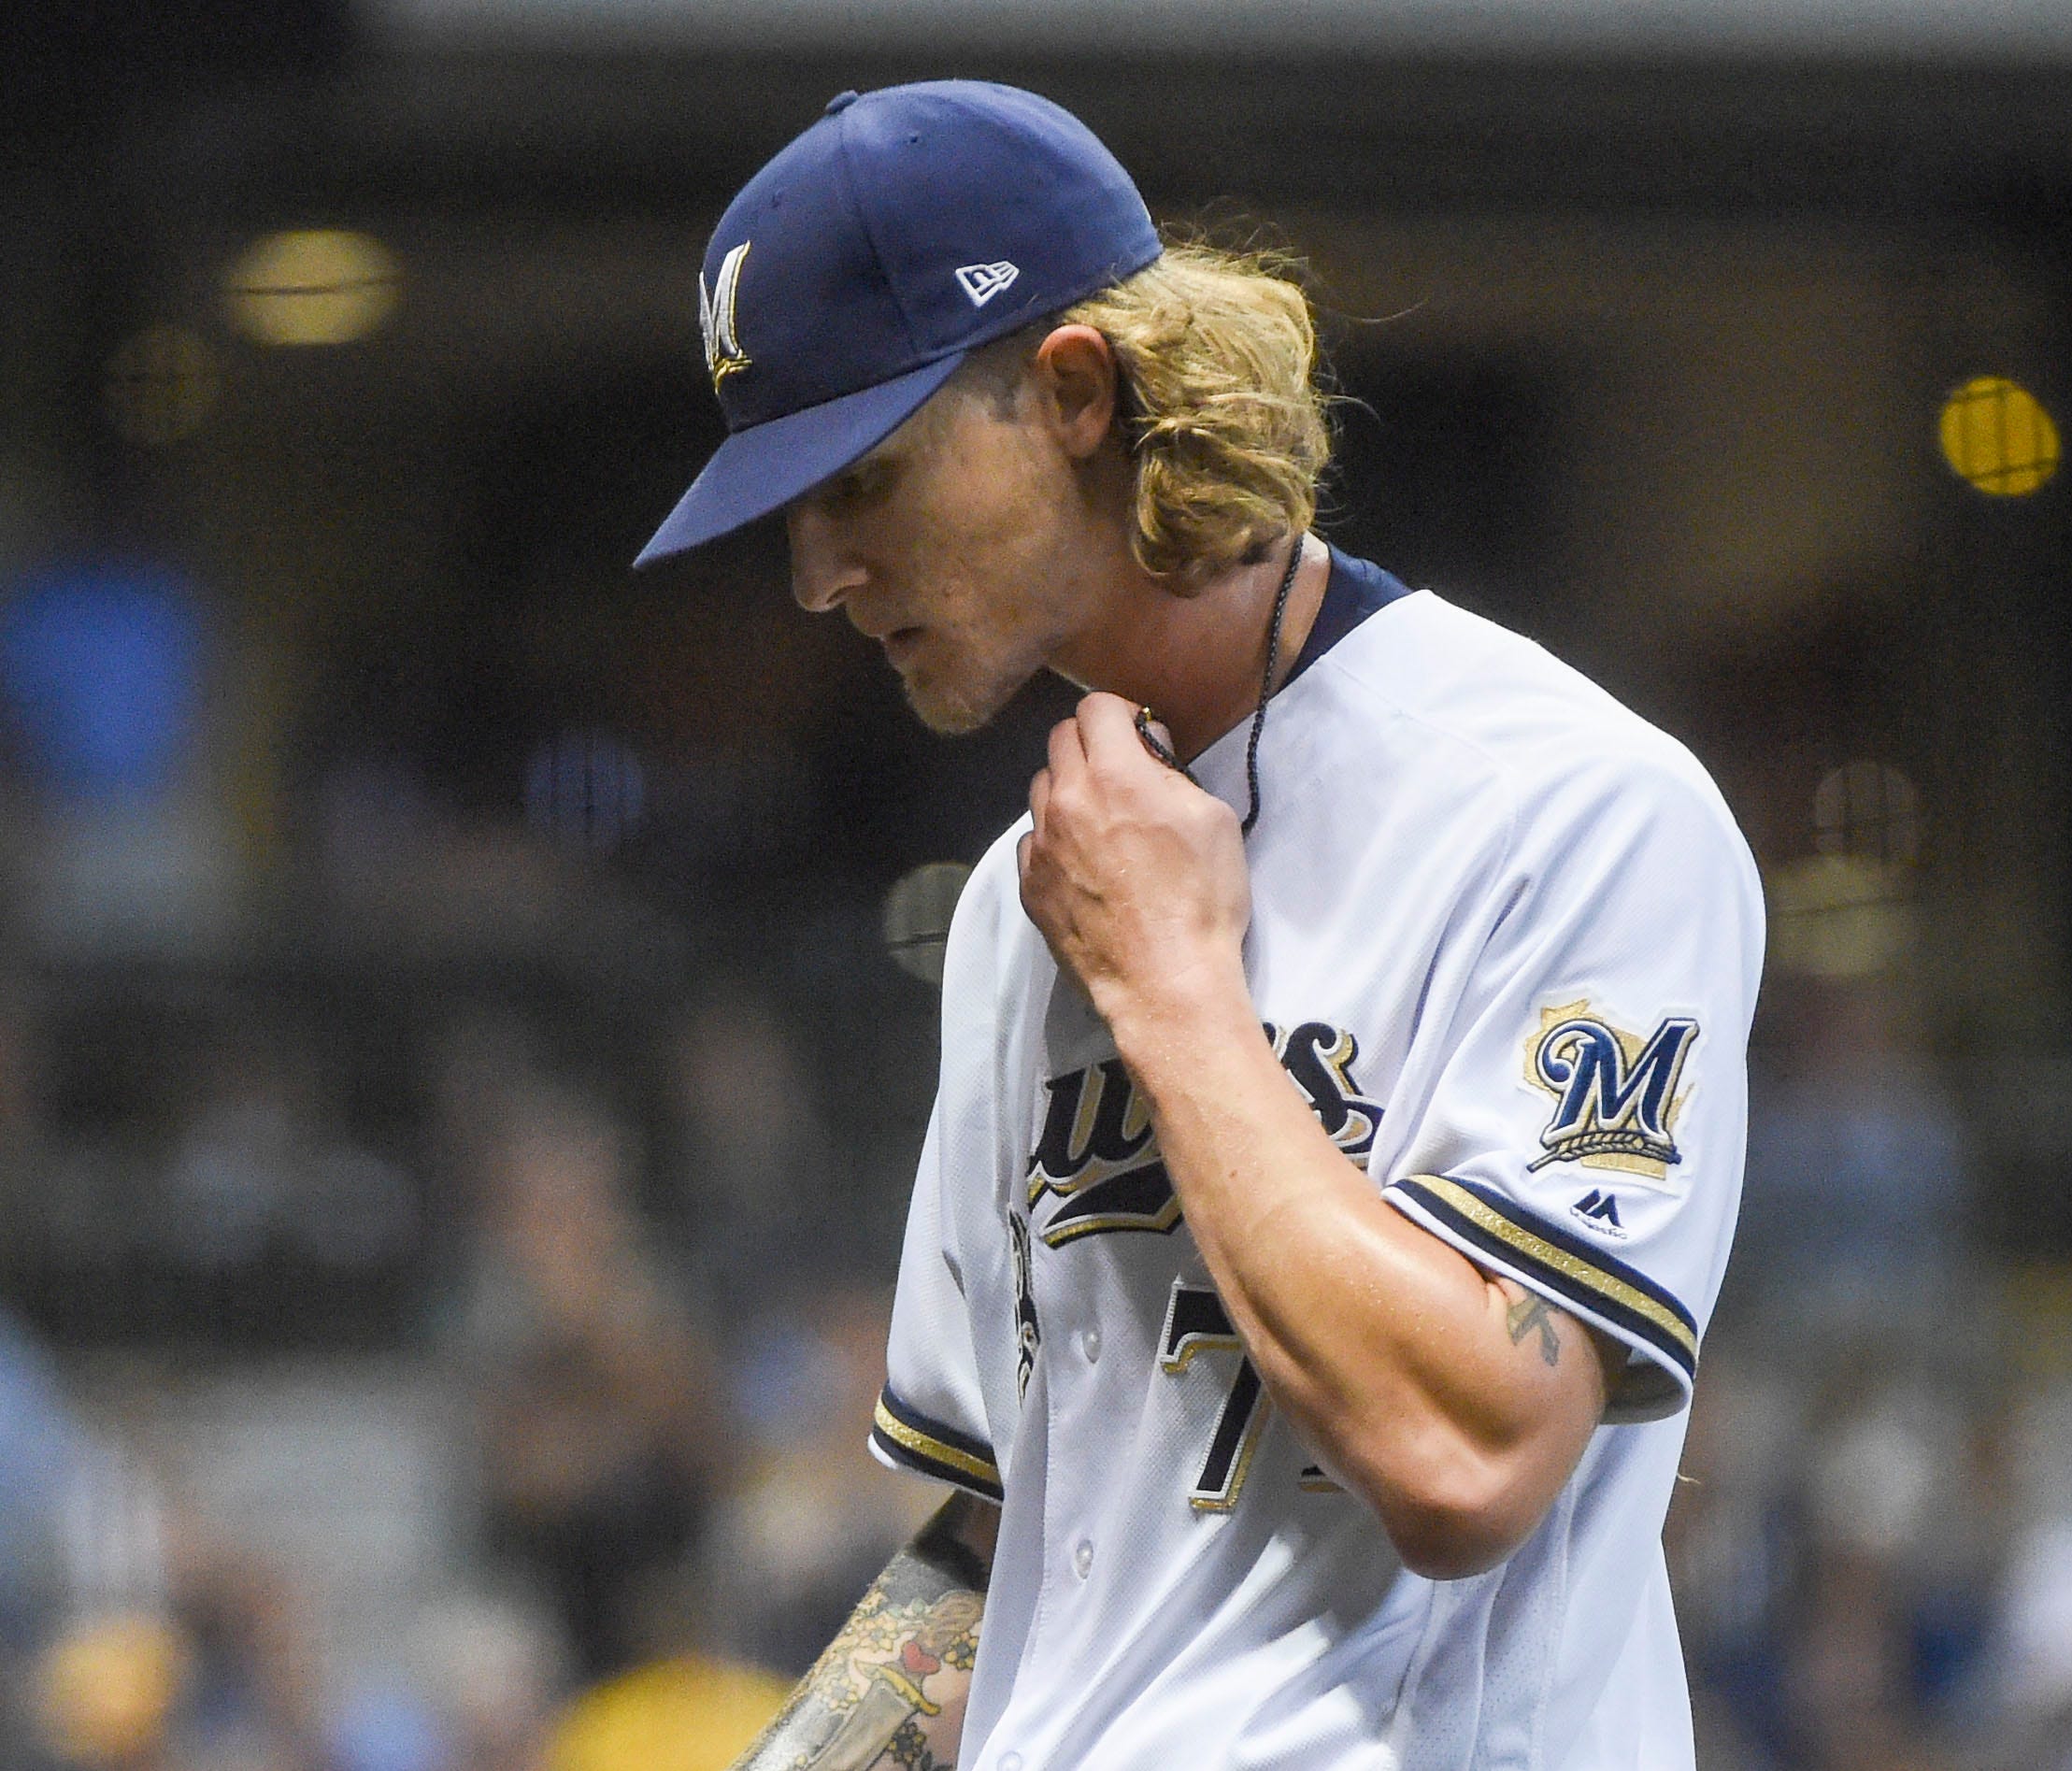 Josh Hader and the Brewers face an uphill battle in the NL Central.